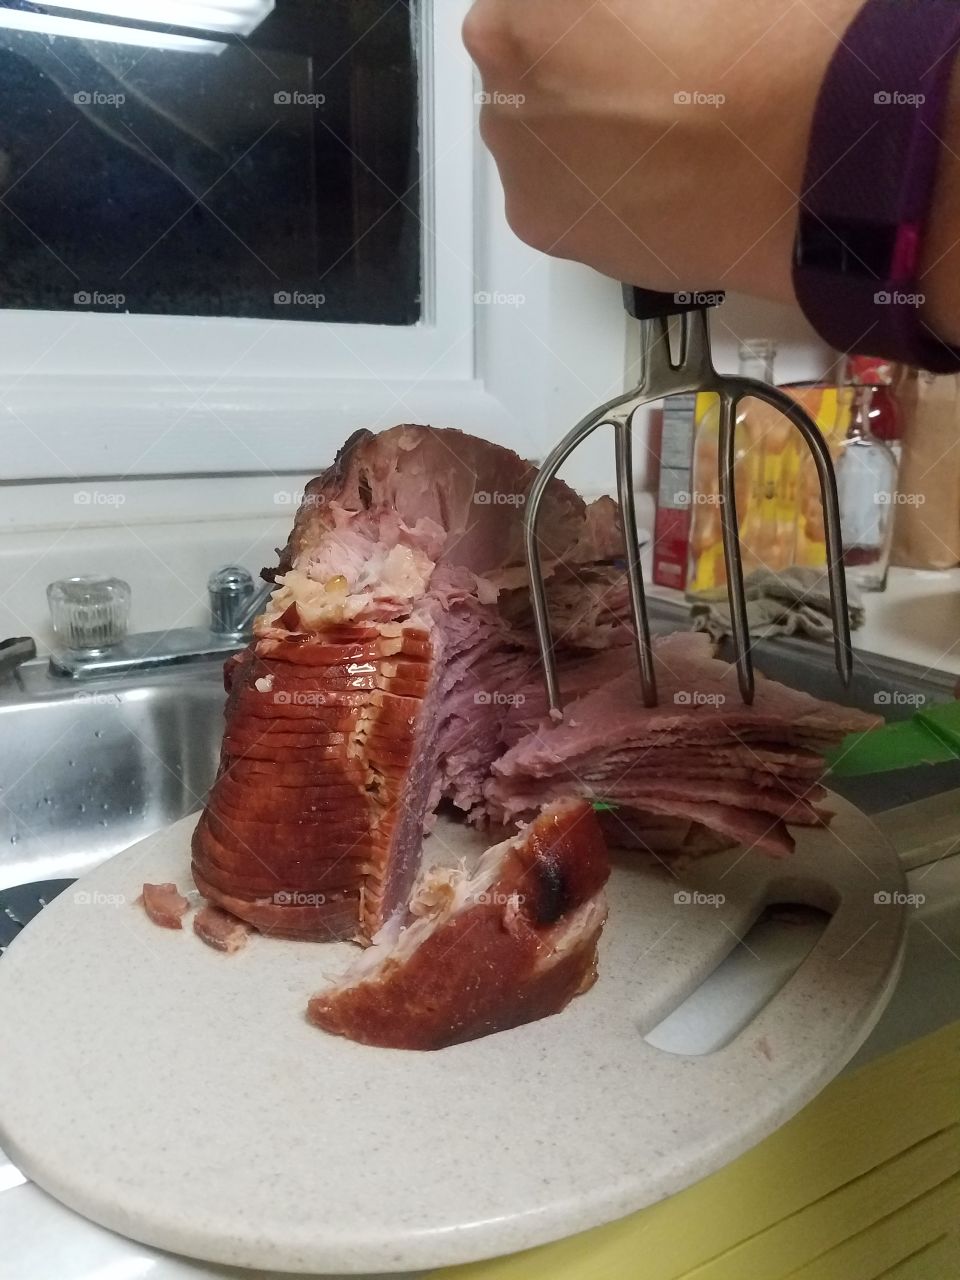 carving the Christmas ham